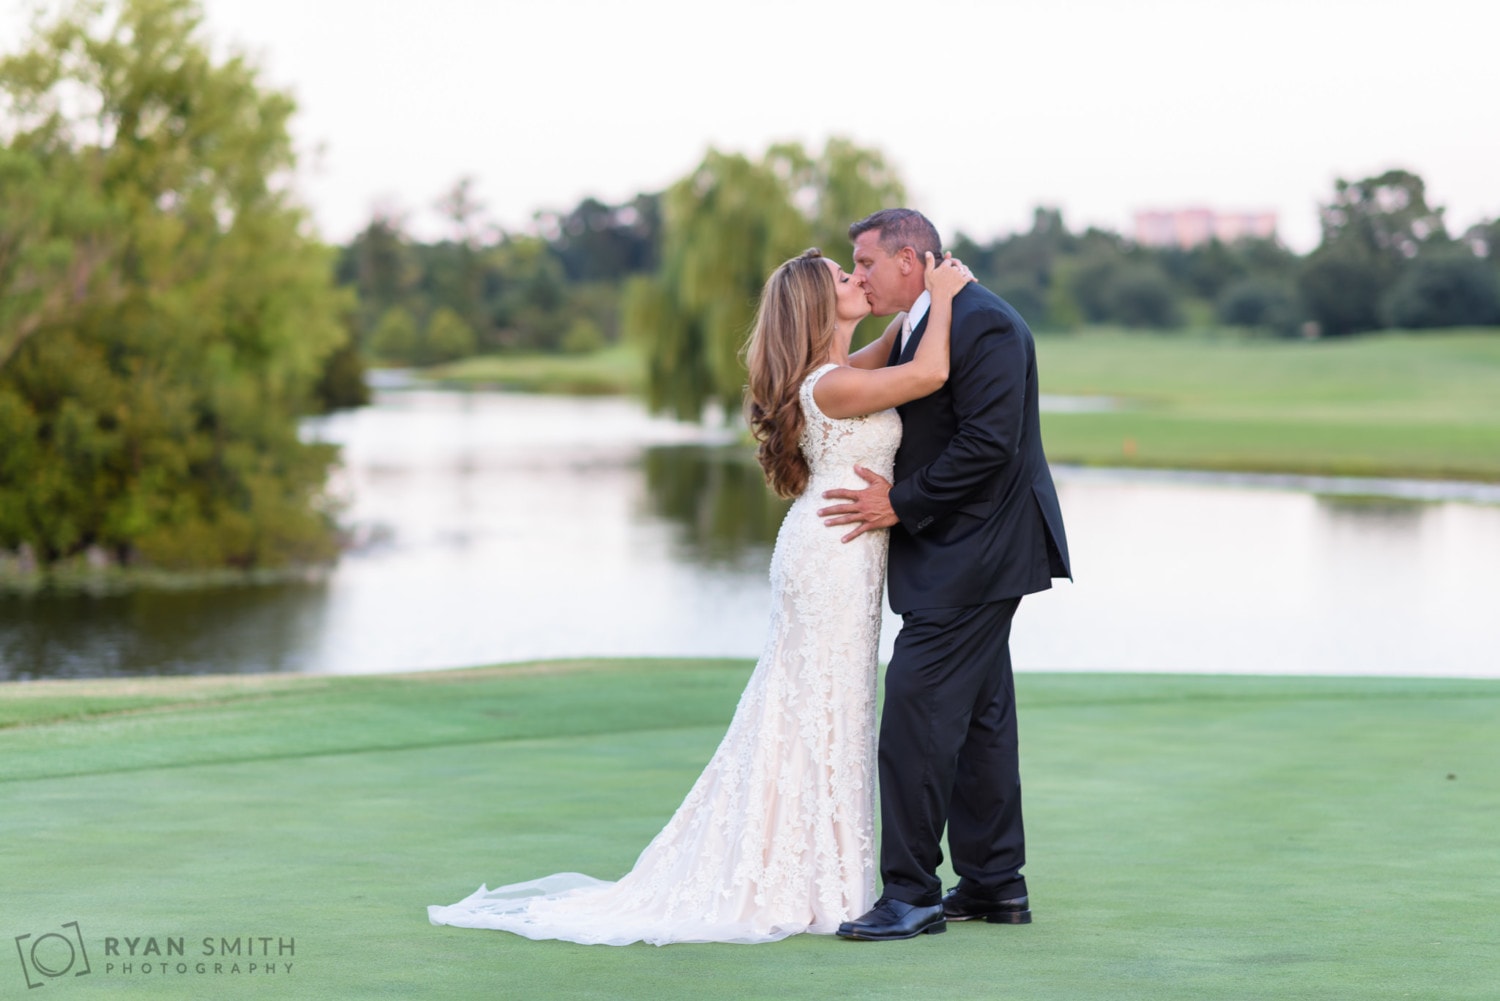 Kiss on the golf course - Members Club at Grande Dunes